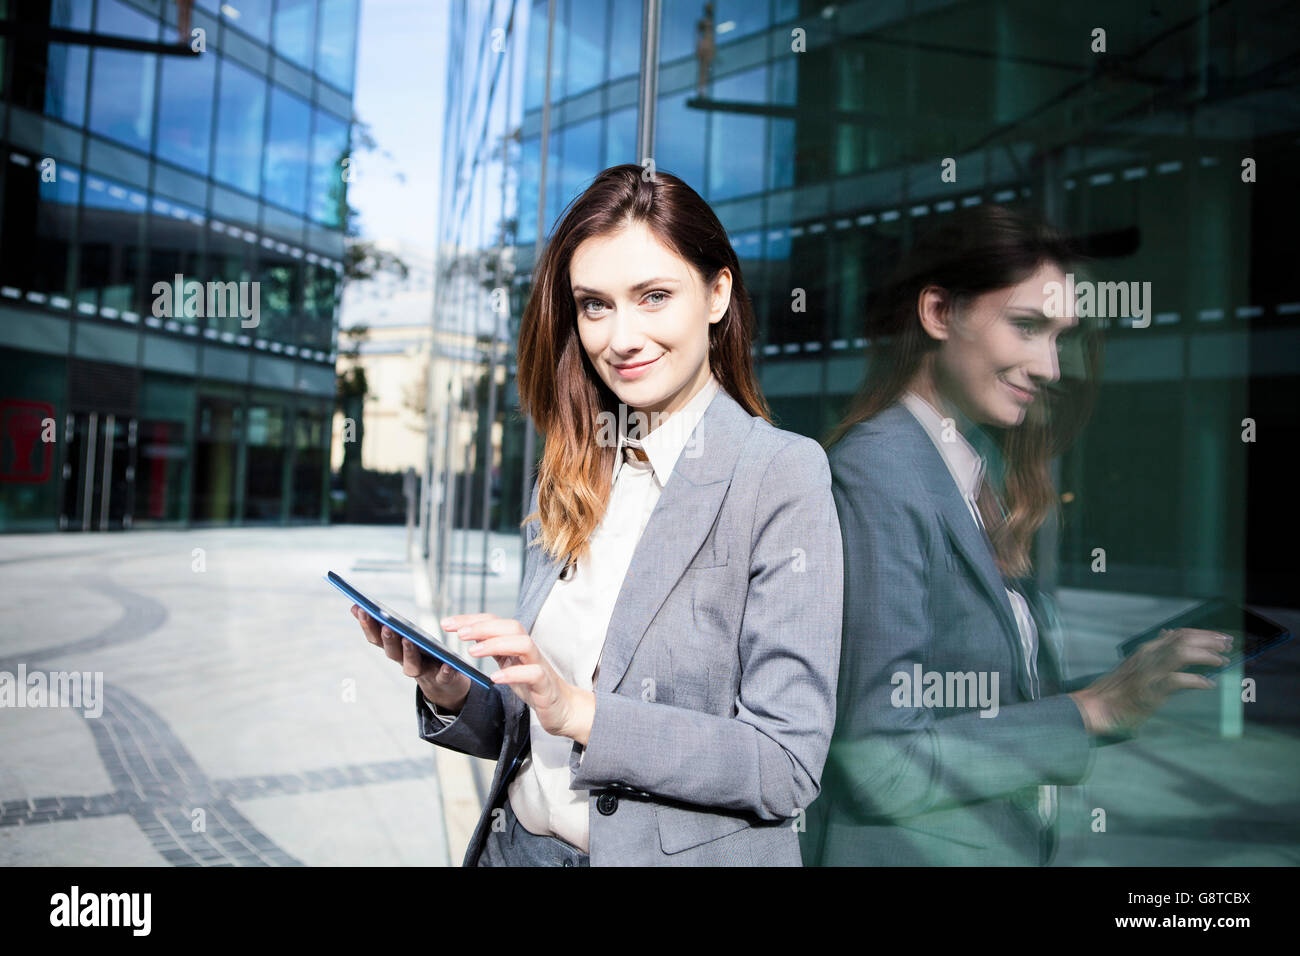 Business Woman using digital tablet in city Banque D'Images